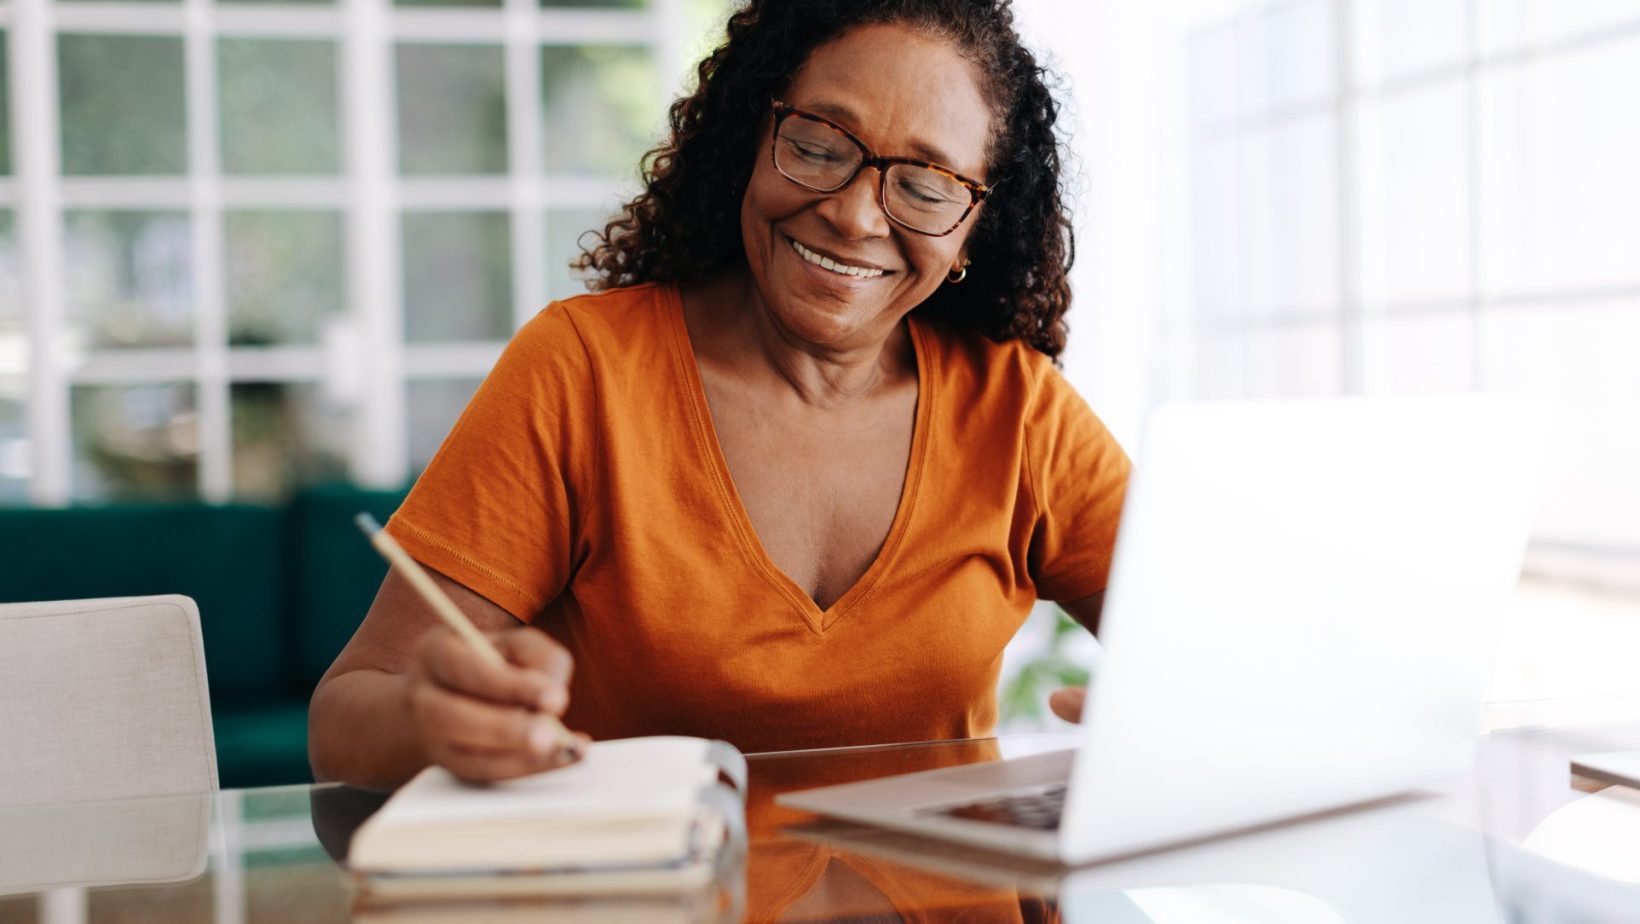 Happy woman sitting at a table in her home office using laptop and writing notes in a notepad